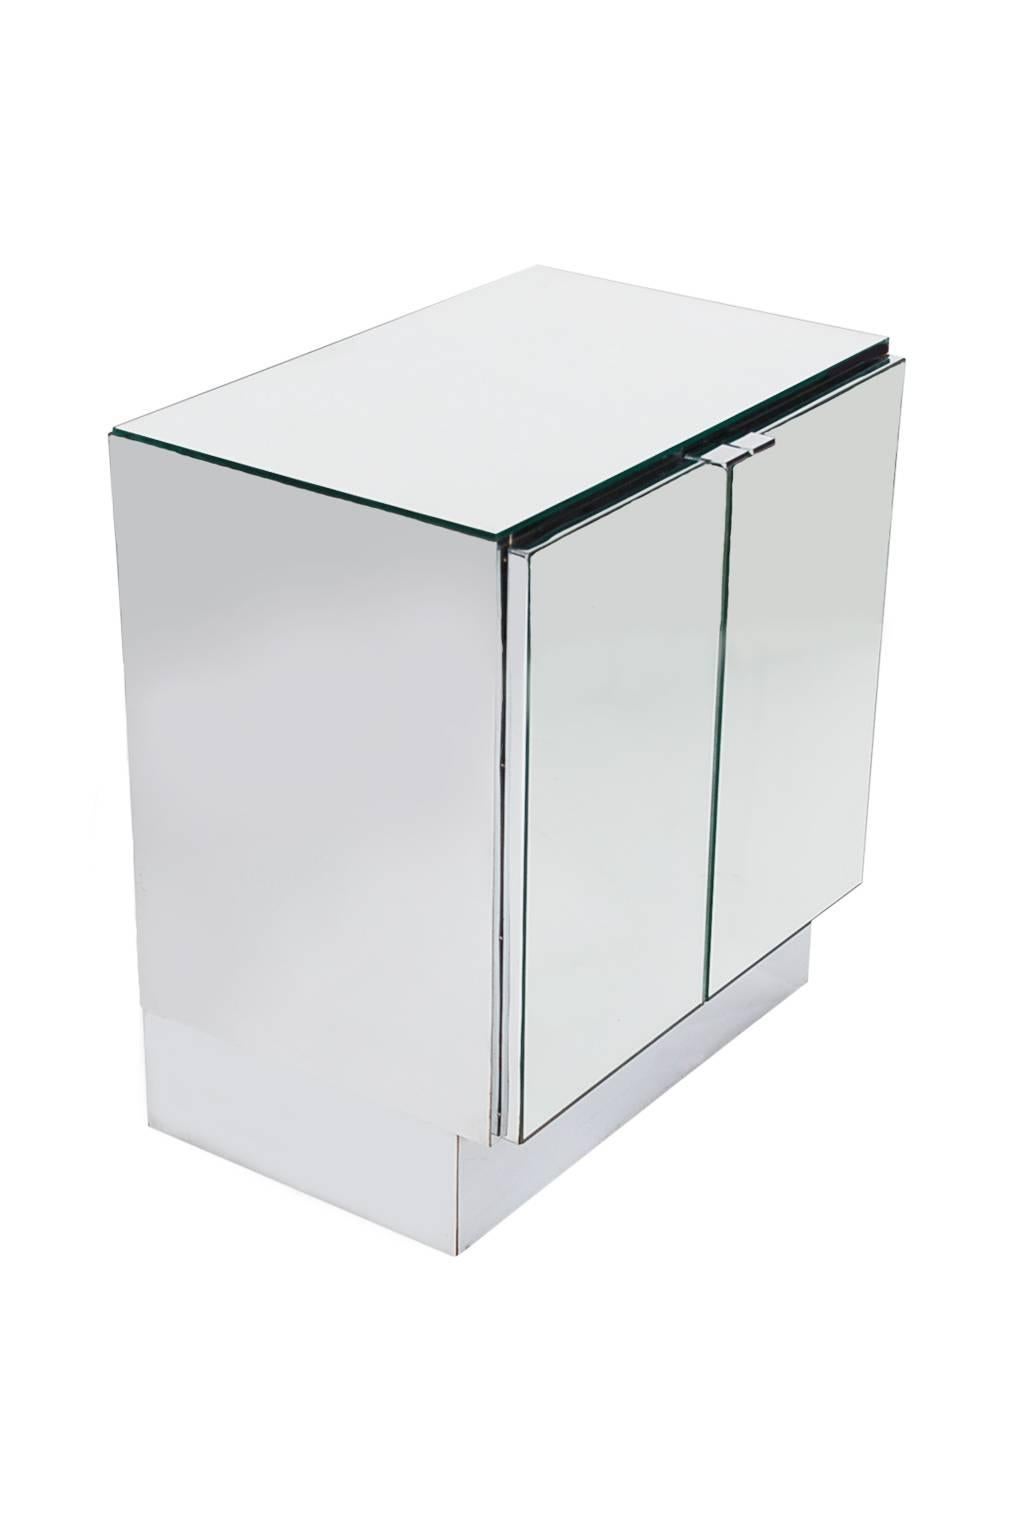 Hollywood Regency Mirrored Cabinets, End Tables or Nightstands by Ello 2